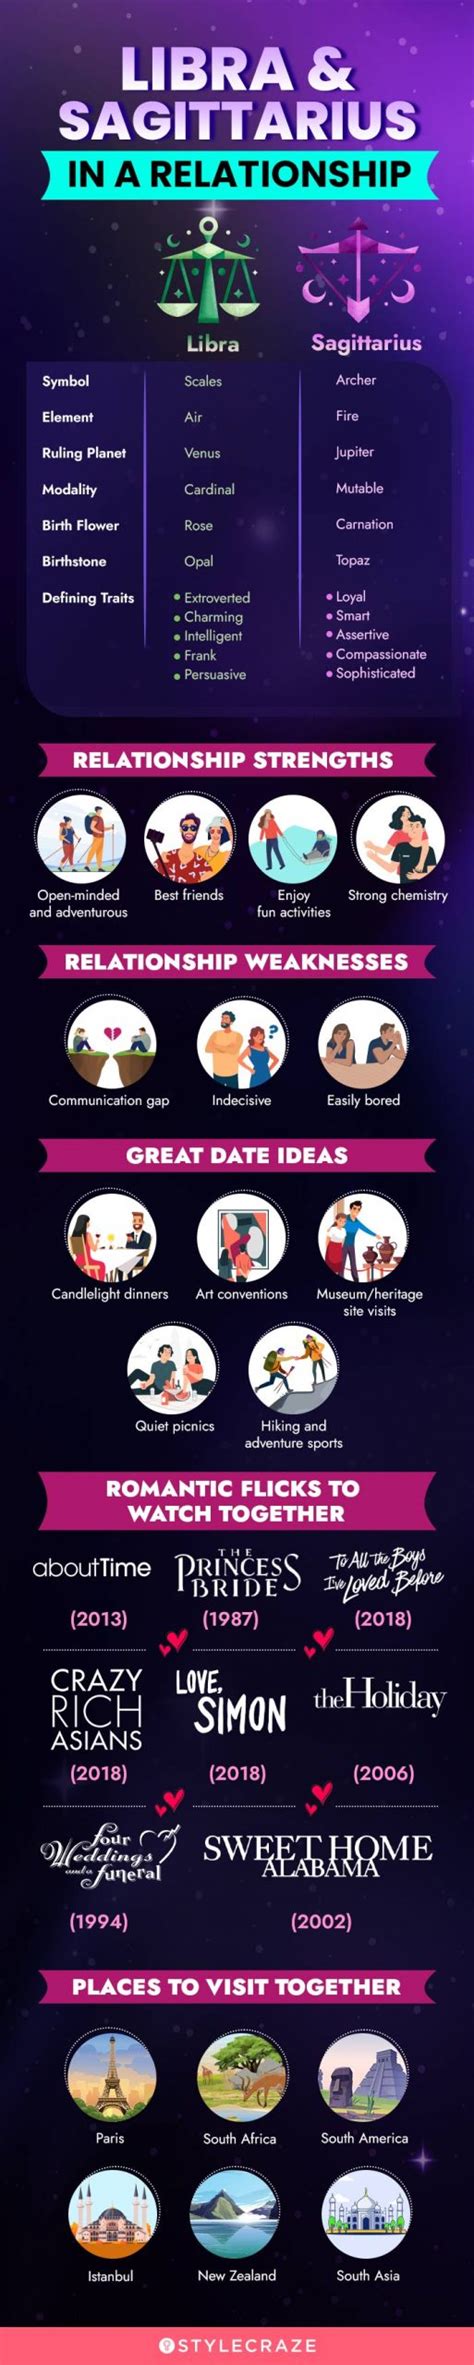 libra and sagittarius compatibility in sex and friendship